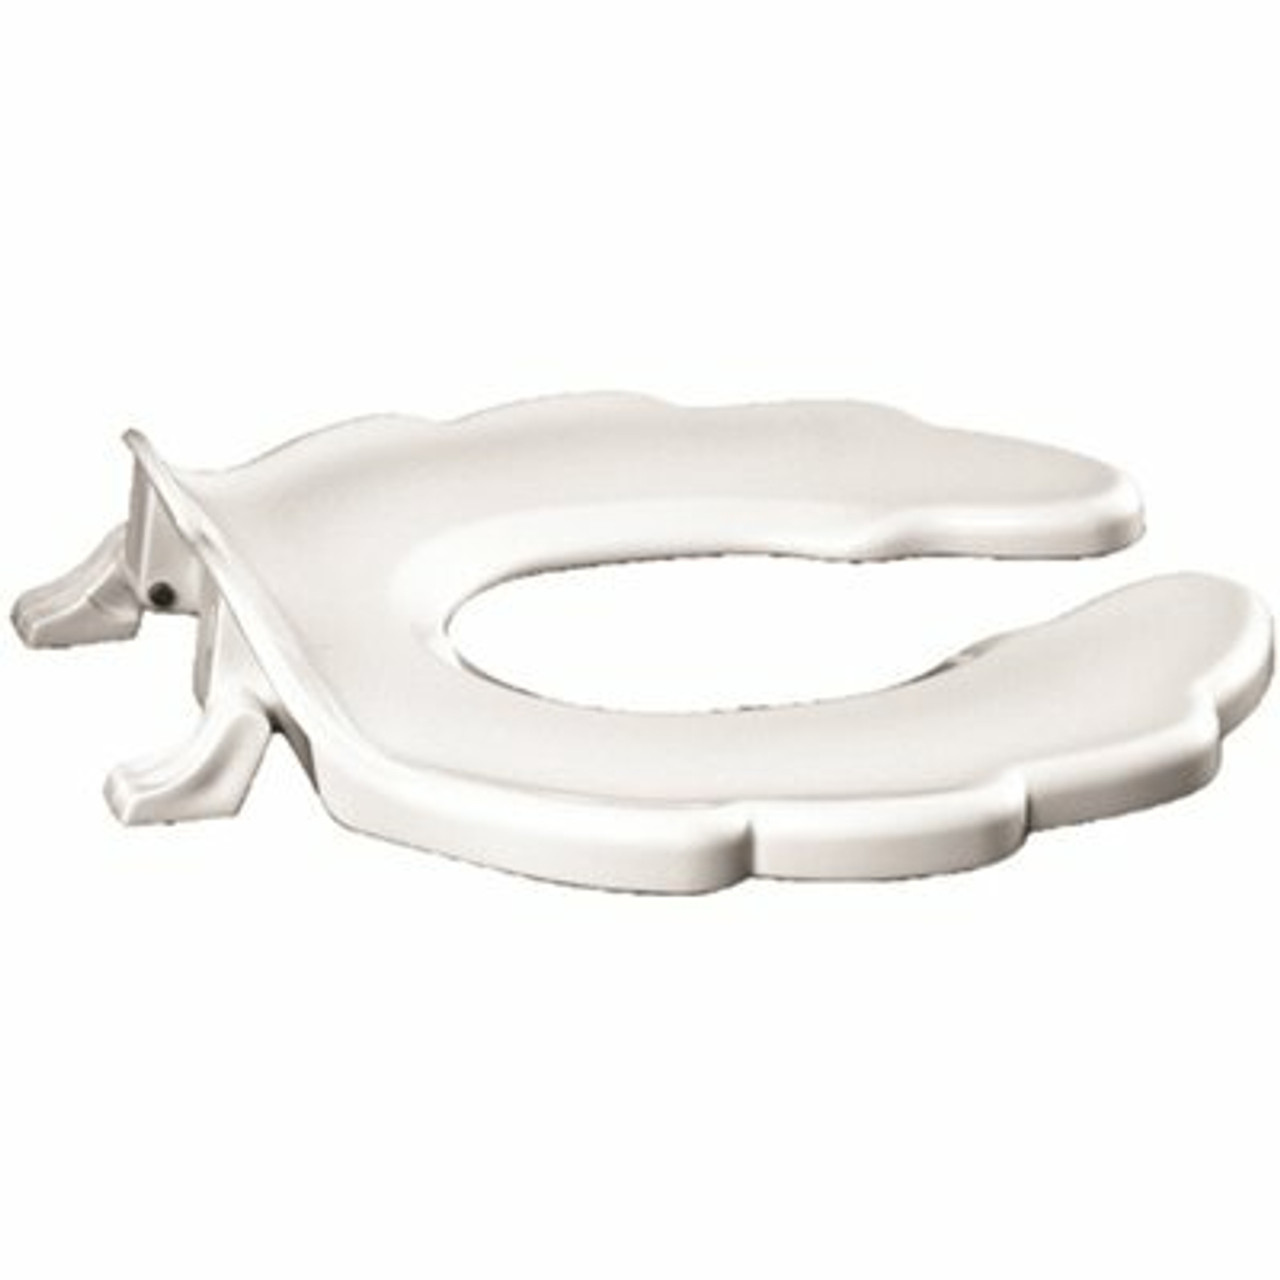 Centoco Baby Bowl Size Round Open Front Toilet Seat In White